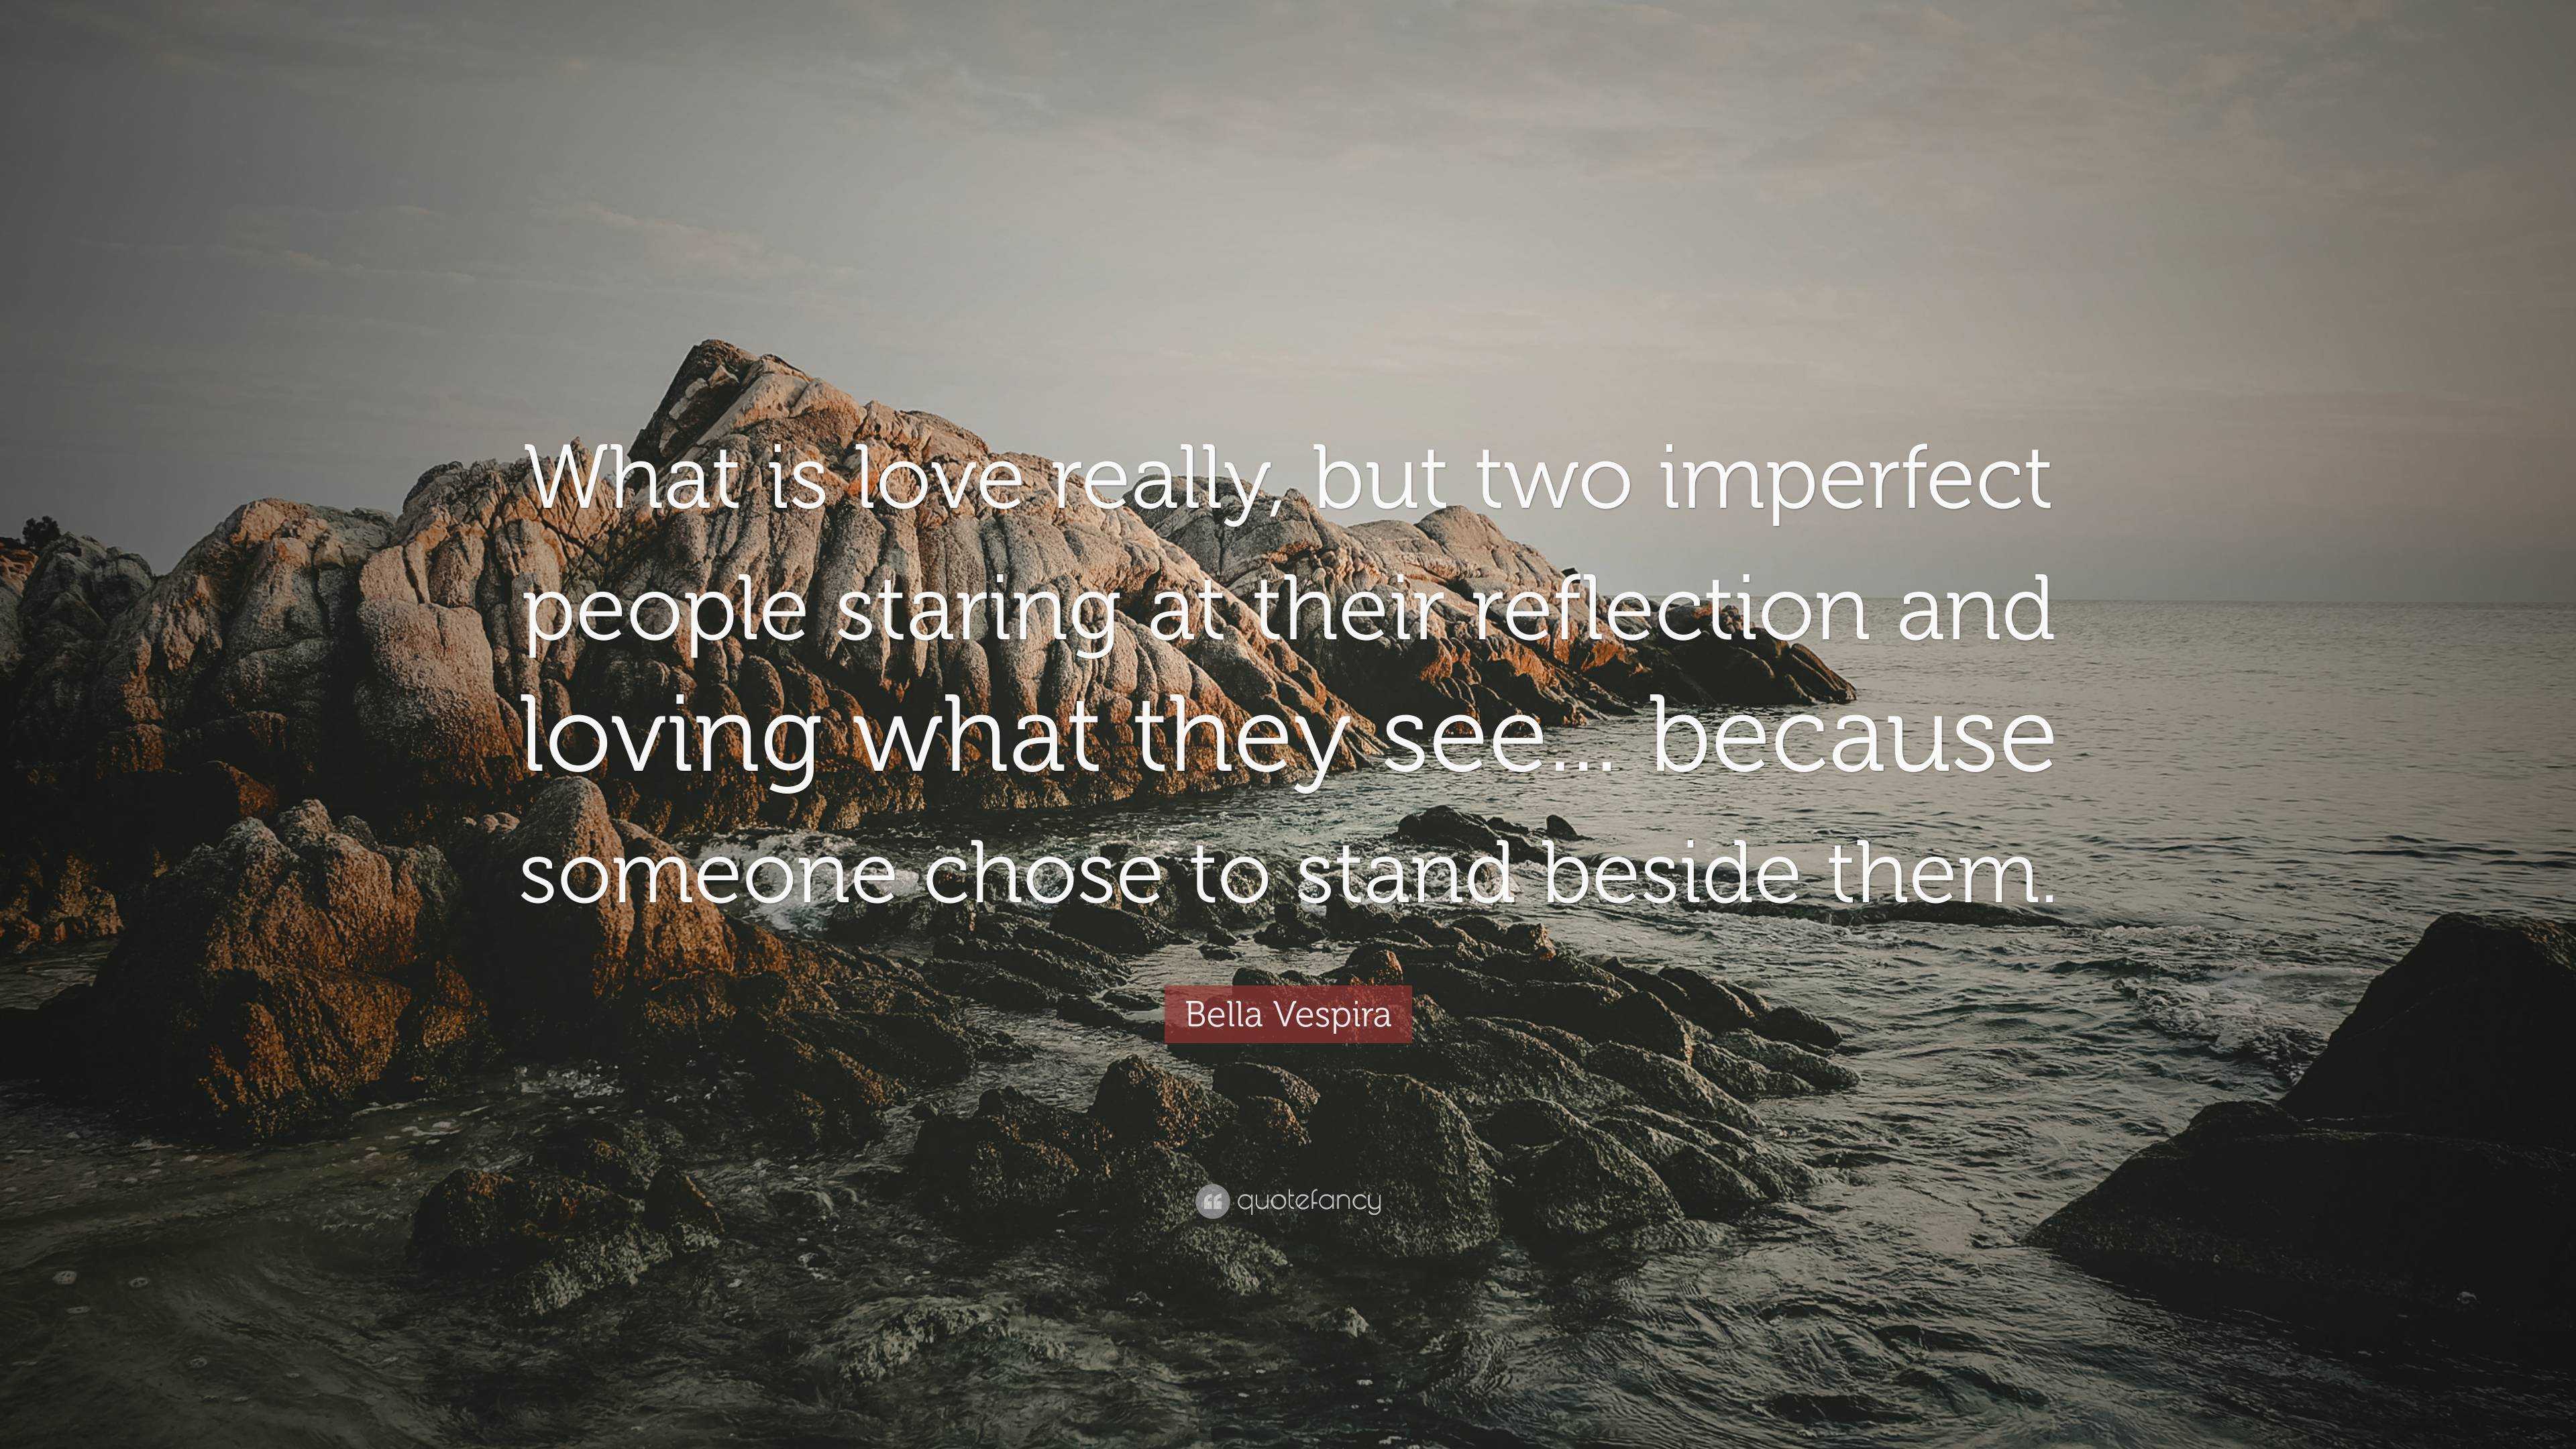 Bella Vespira Quote: “What is love really, but two imperfect people ...